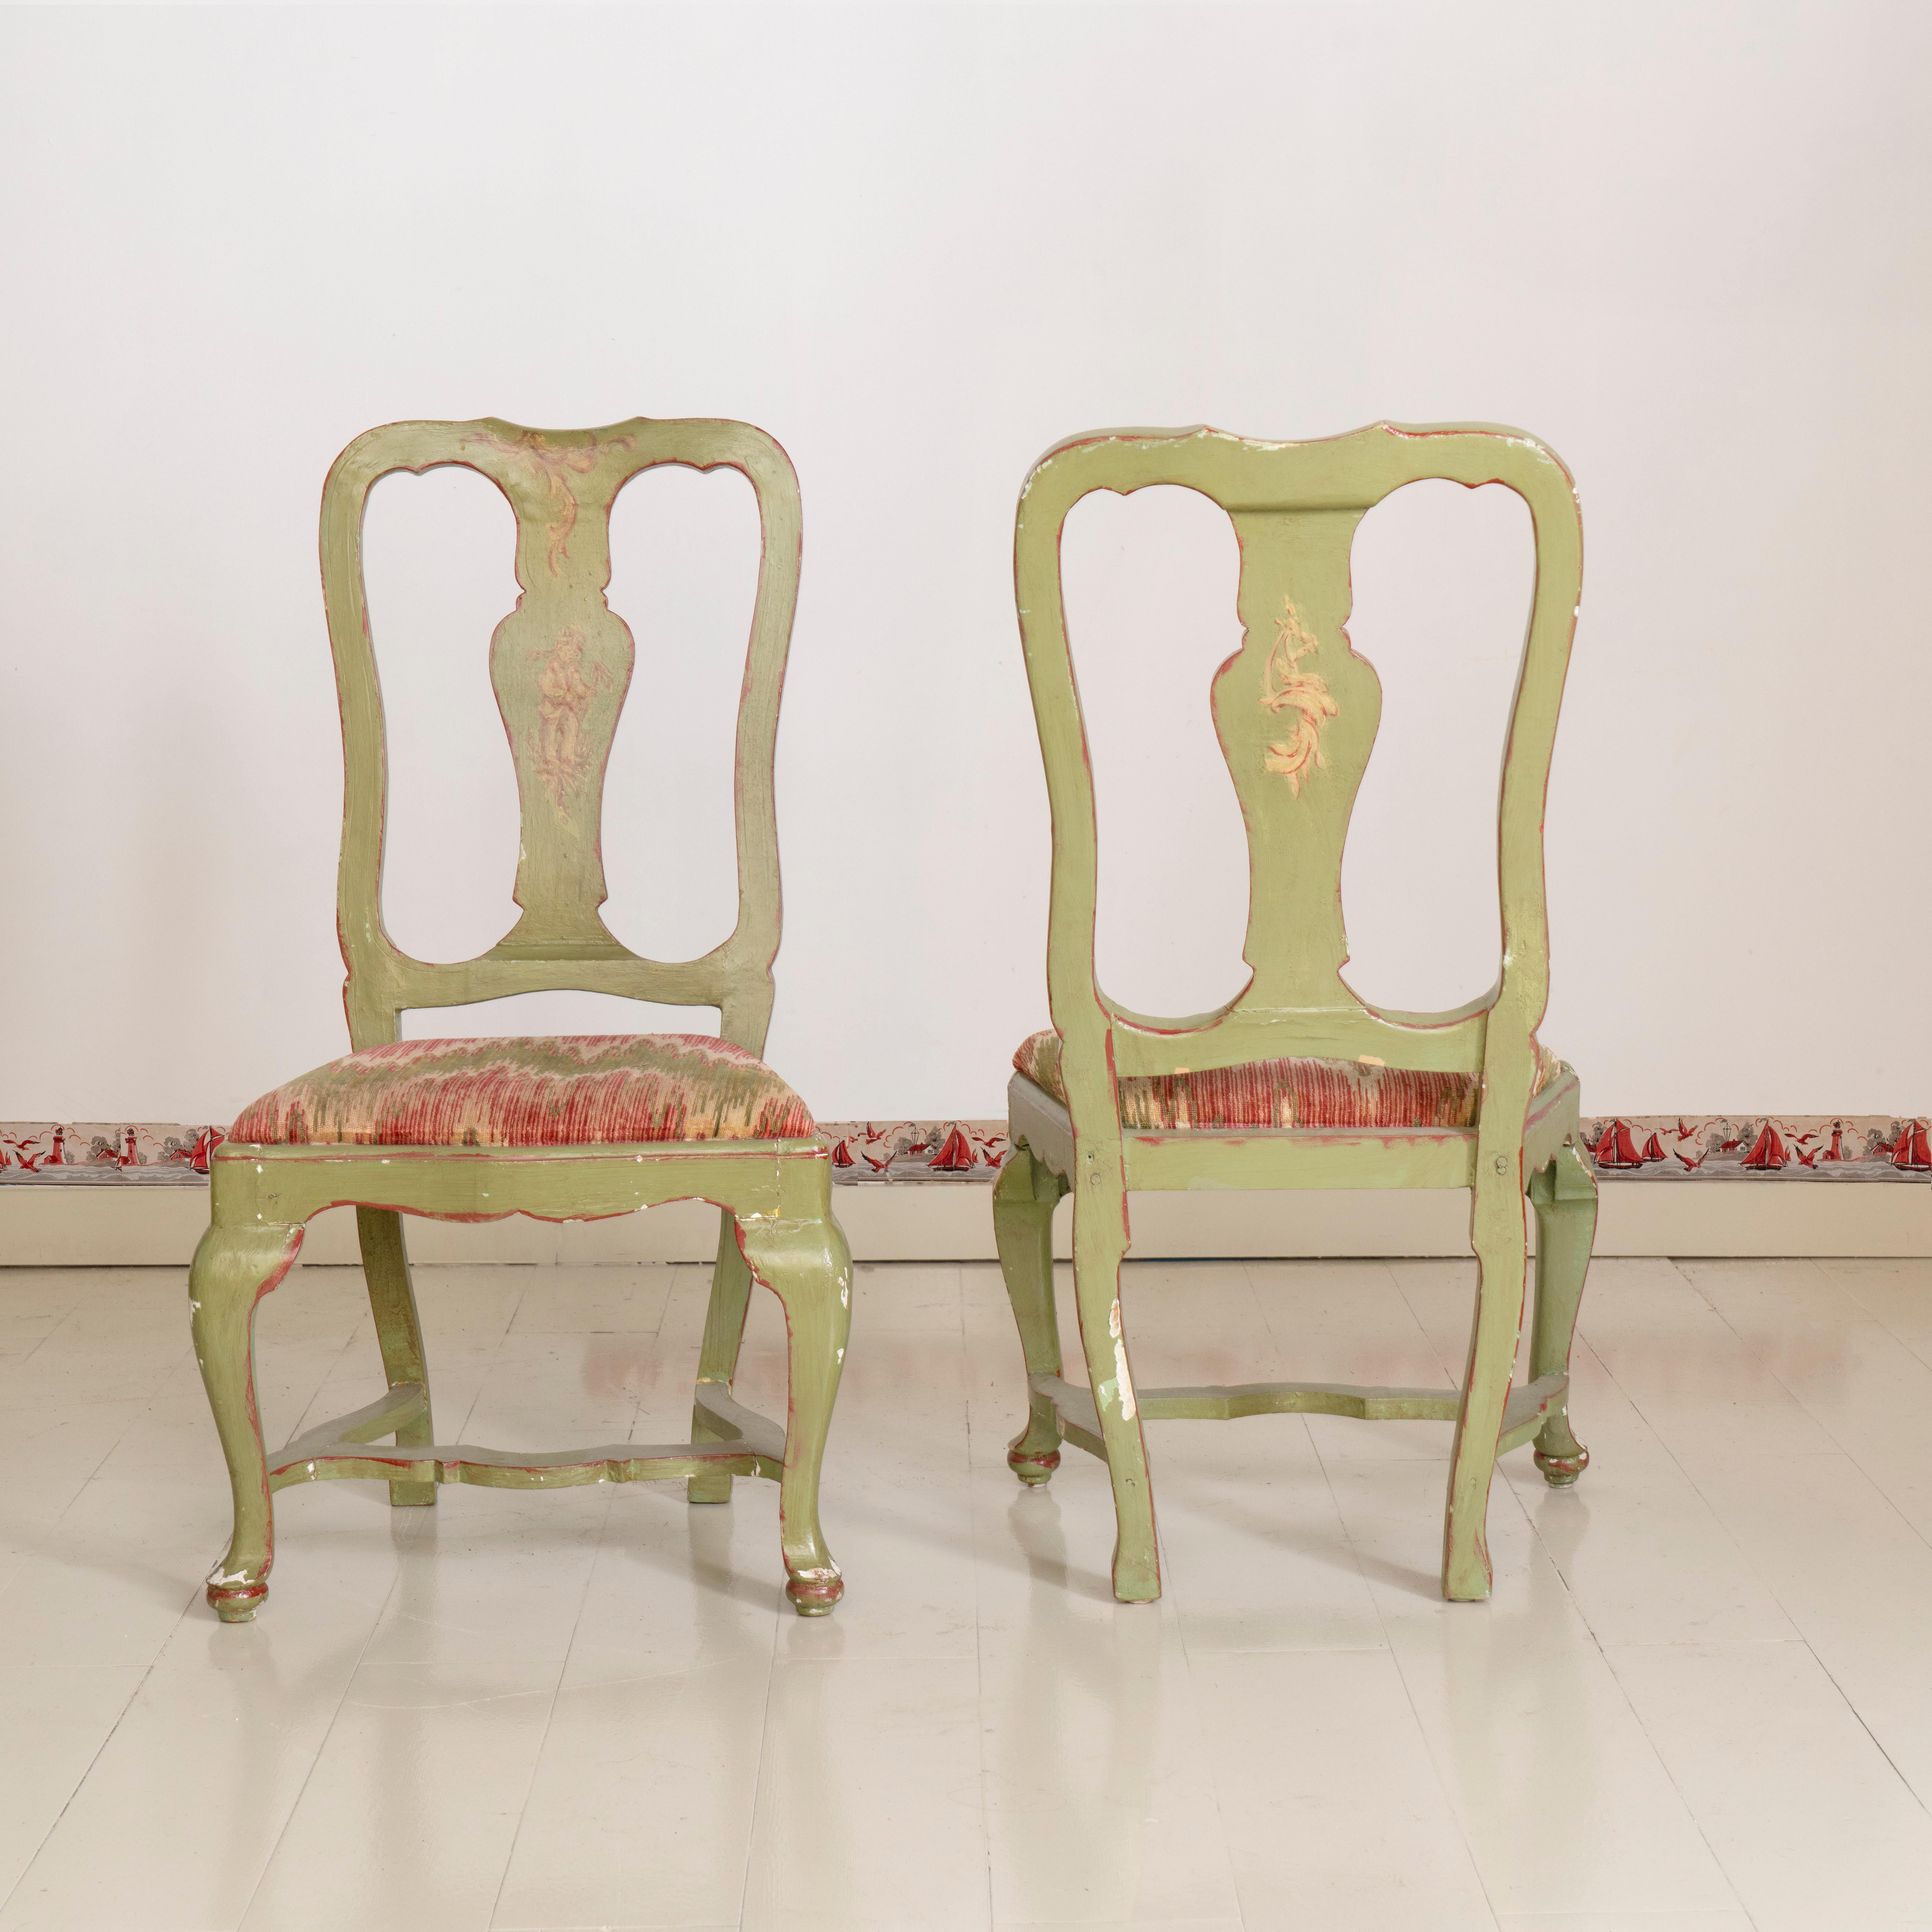 Set of four 19th century Italian painted chairs. Each chair has a light green background against a painted folk figure on the center splat.